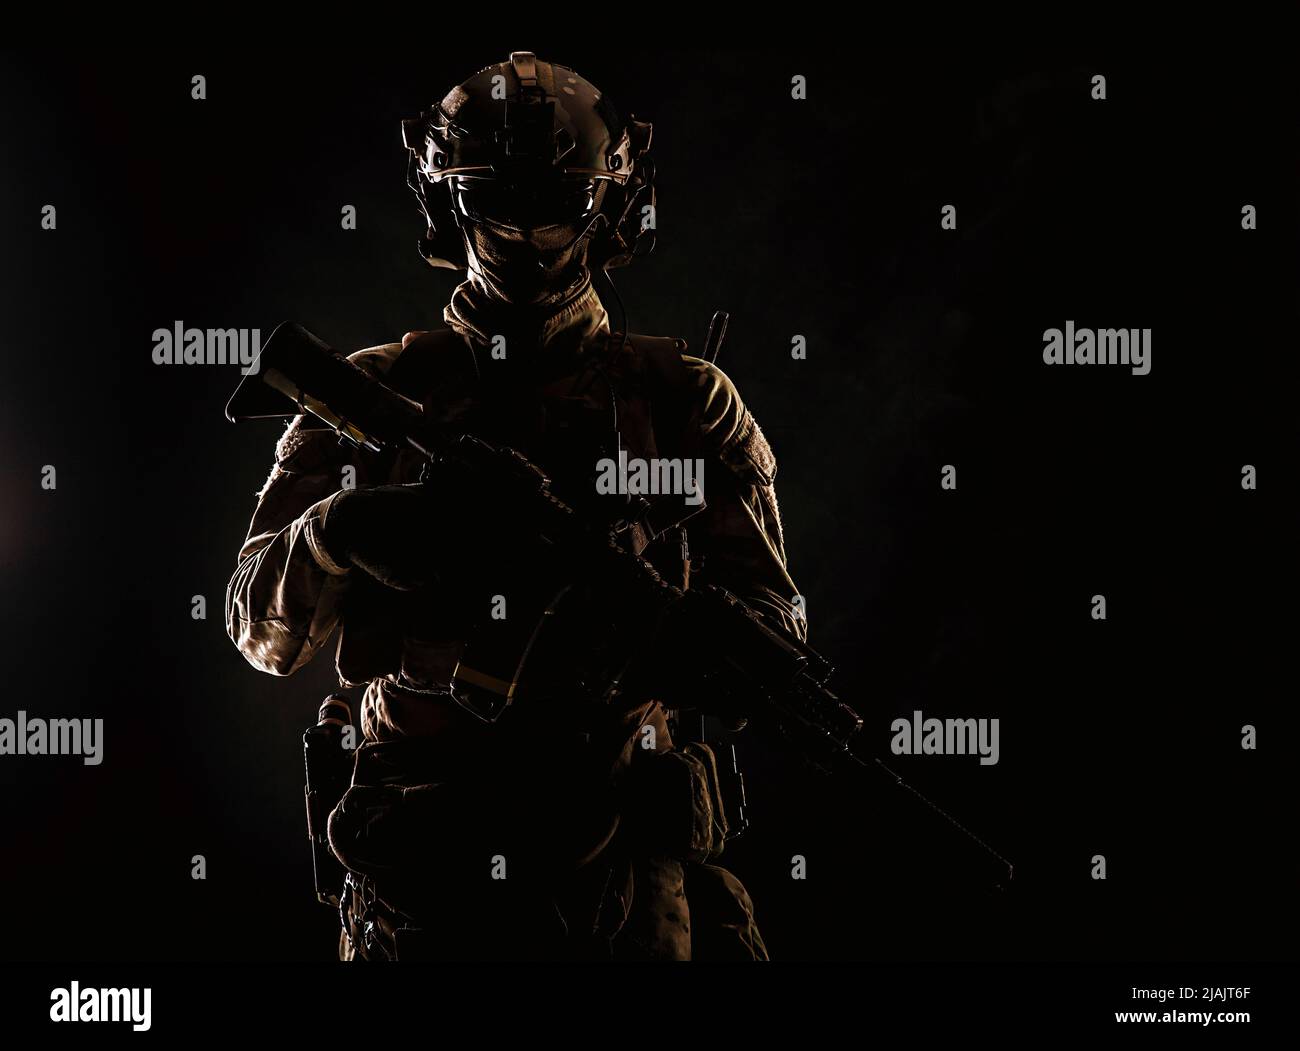 Low key studio portrait of an Army special forces elite soldier standing with assault rifle in darkness. Stock Photo